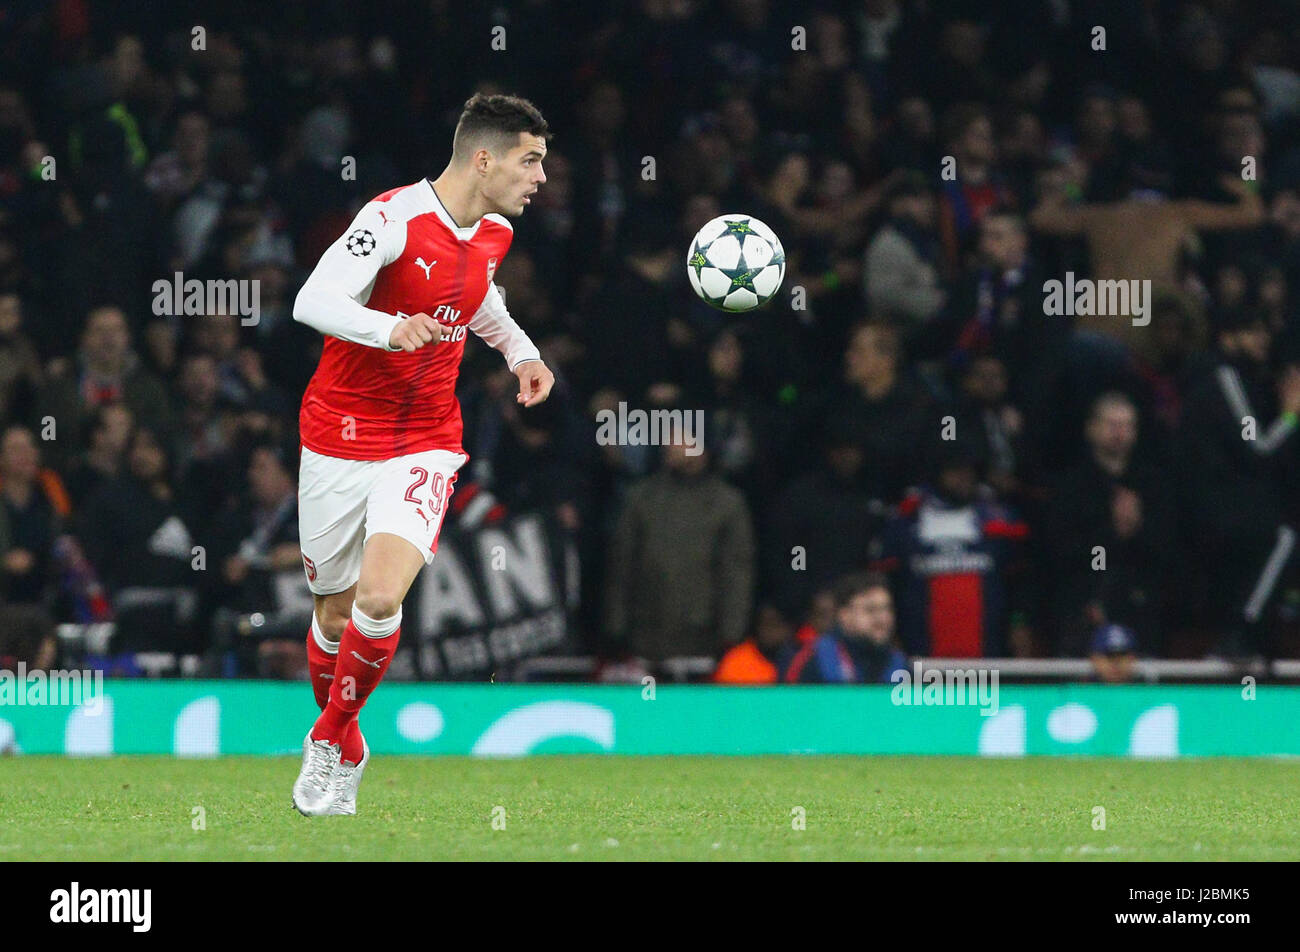 Granit Xhaka of Arsenal during the UEFA Champions League match between Arsenal and Paris Saint-Germain at the Emirates Stadium in London. November 23, 2016. Arron Gent / Telephoto Images EDITORIAL USE ONLY  FA Premier League and Football League images are subject to DataCo Licence see www.football-dataco.com Stock Photo